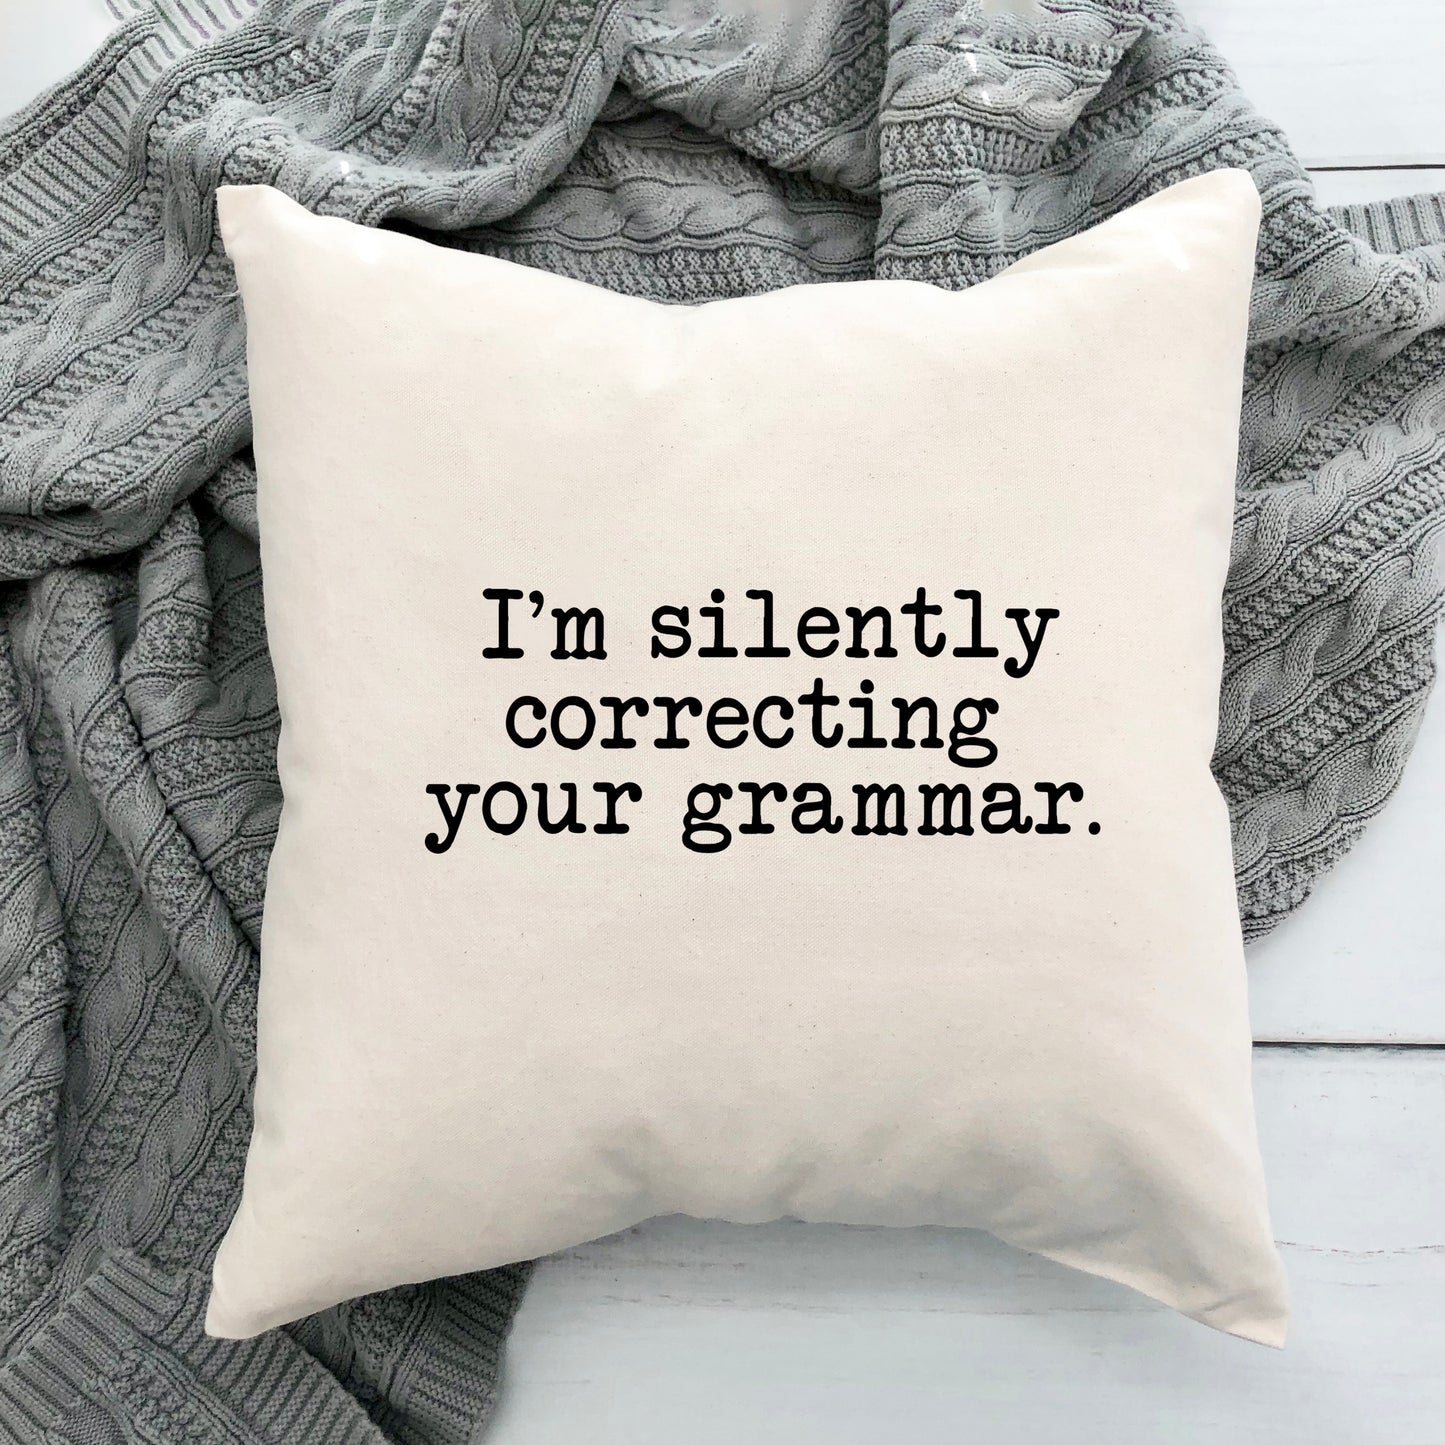 I'm Silently Correcting | Pillow Cover